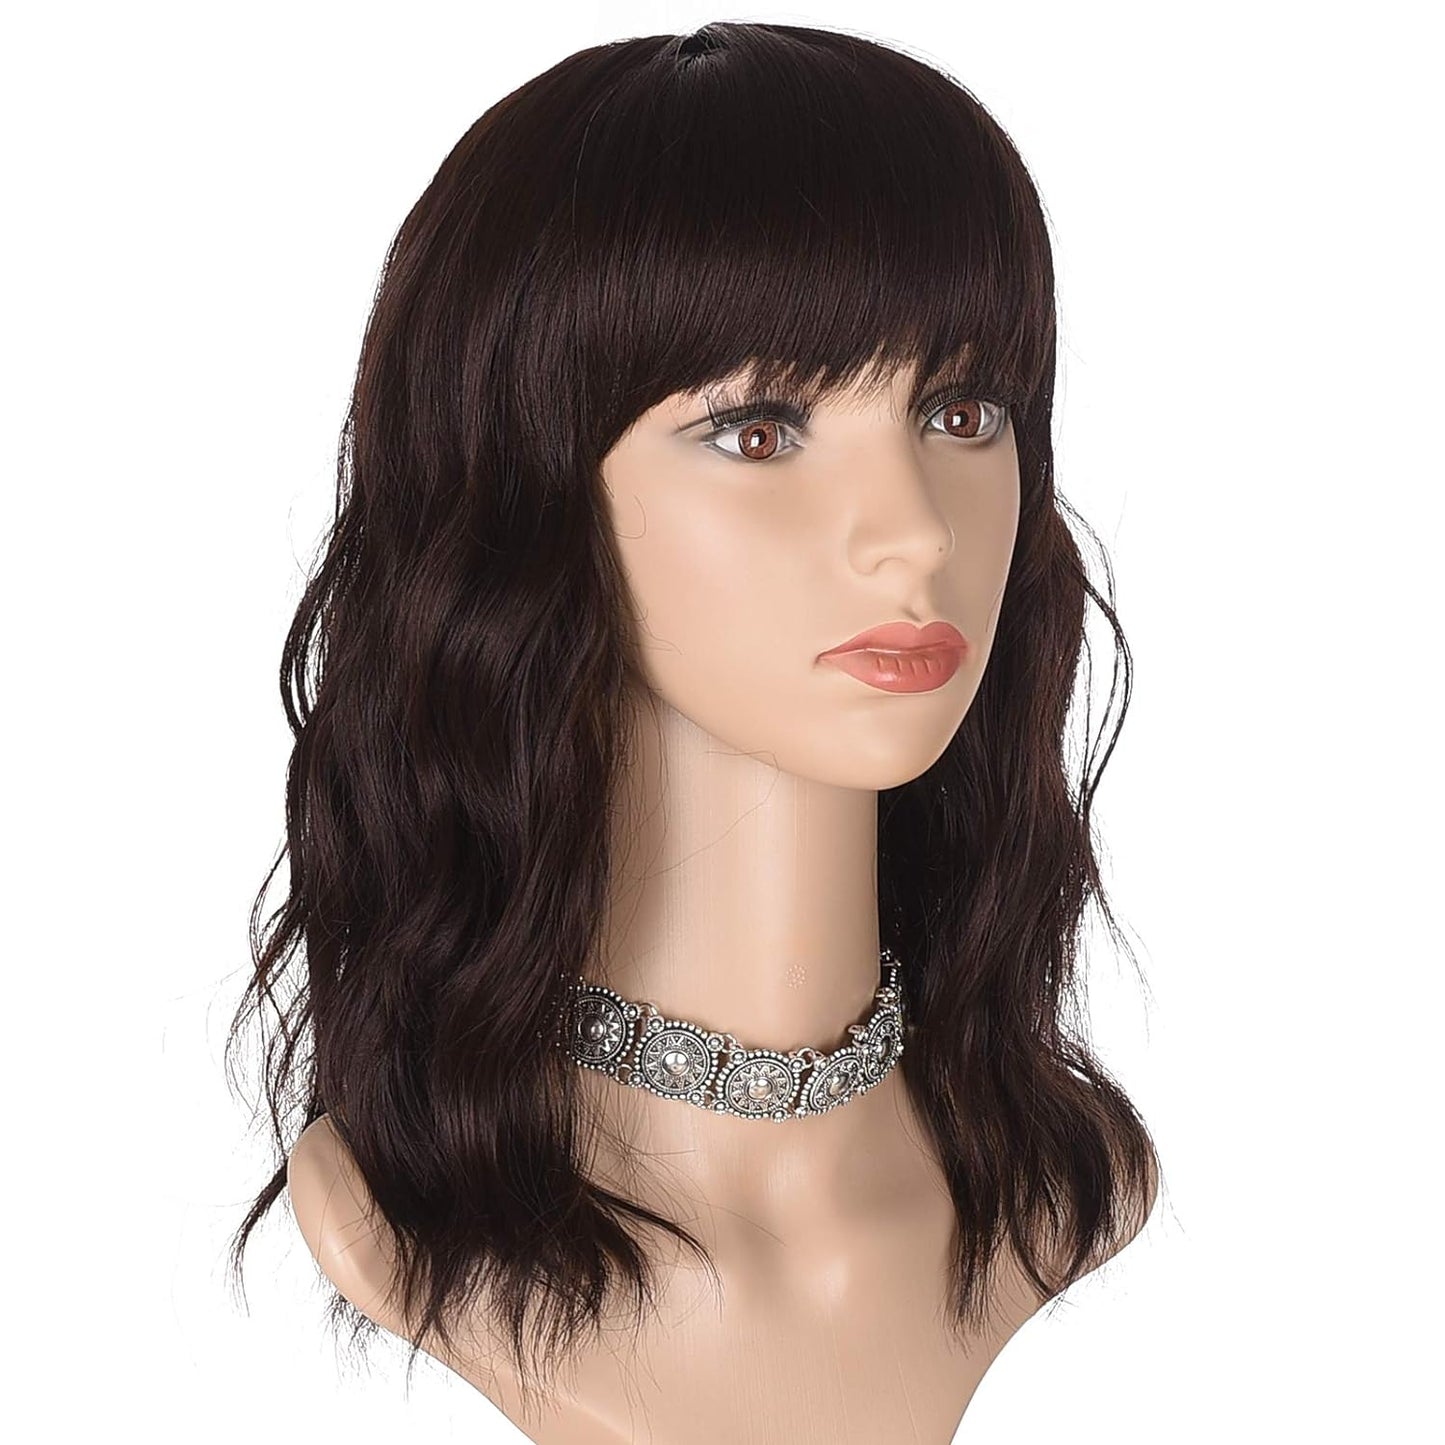 Short Black Wavy Bob Wig with Bangs for Women 16 Inches Natural Synthetic Hair Wavy Wigs